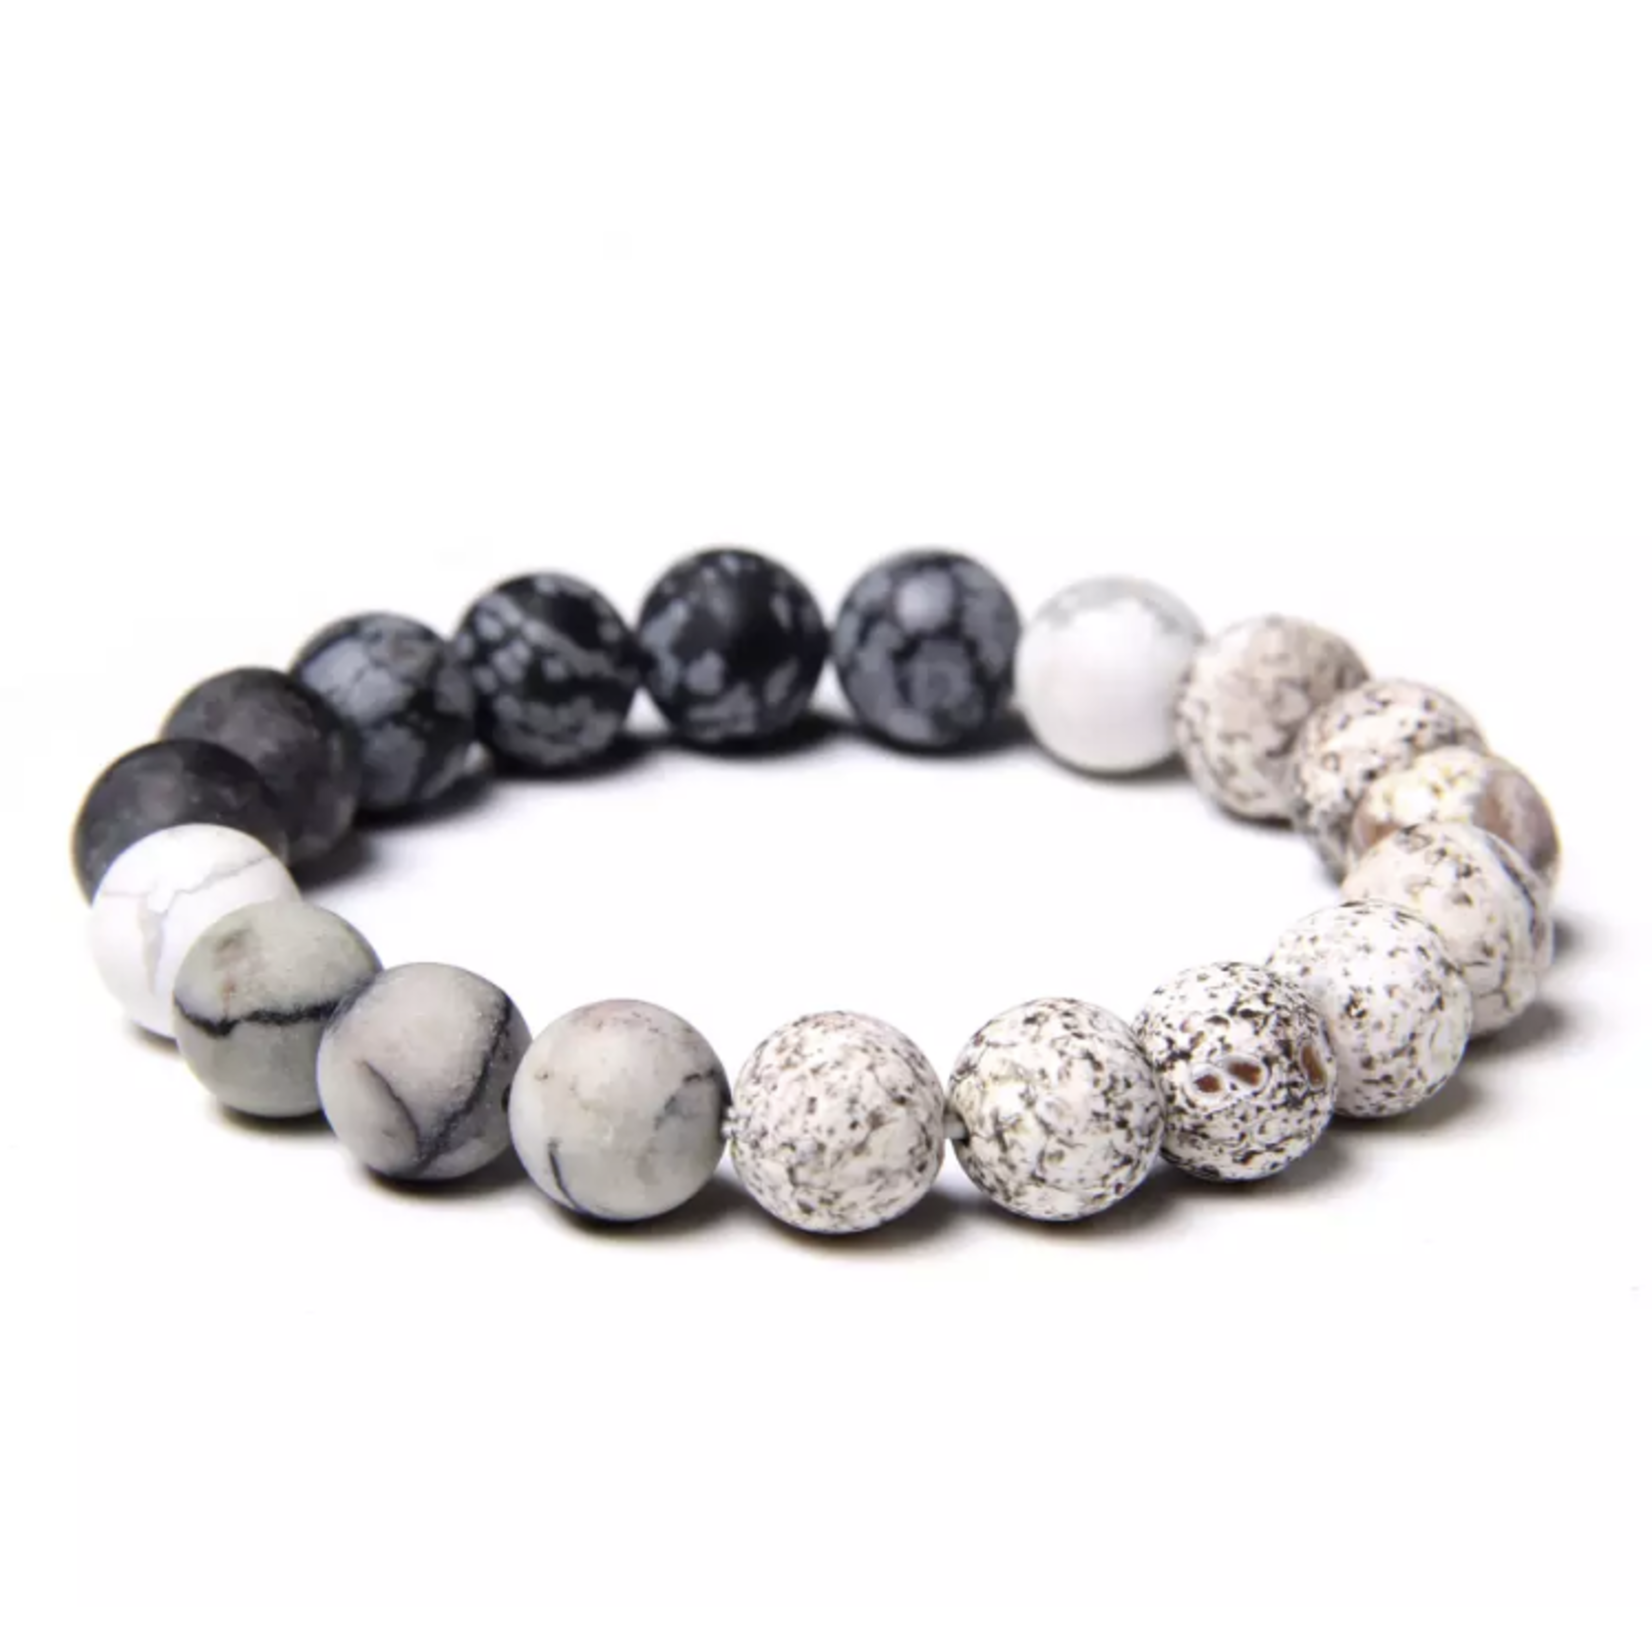 23cm Natural Stone Bracelets, 10mm - Matte and Refined